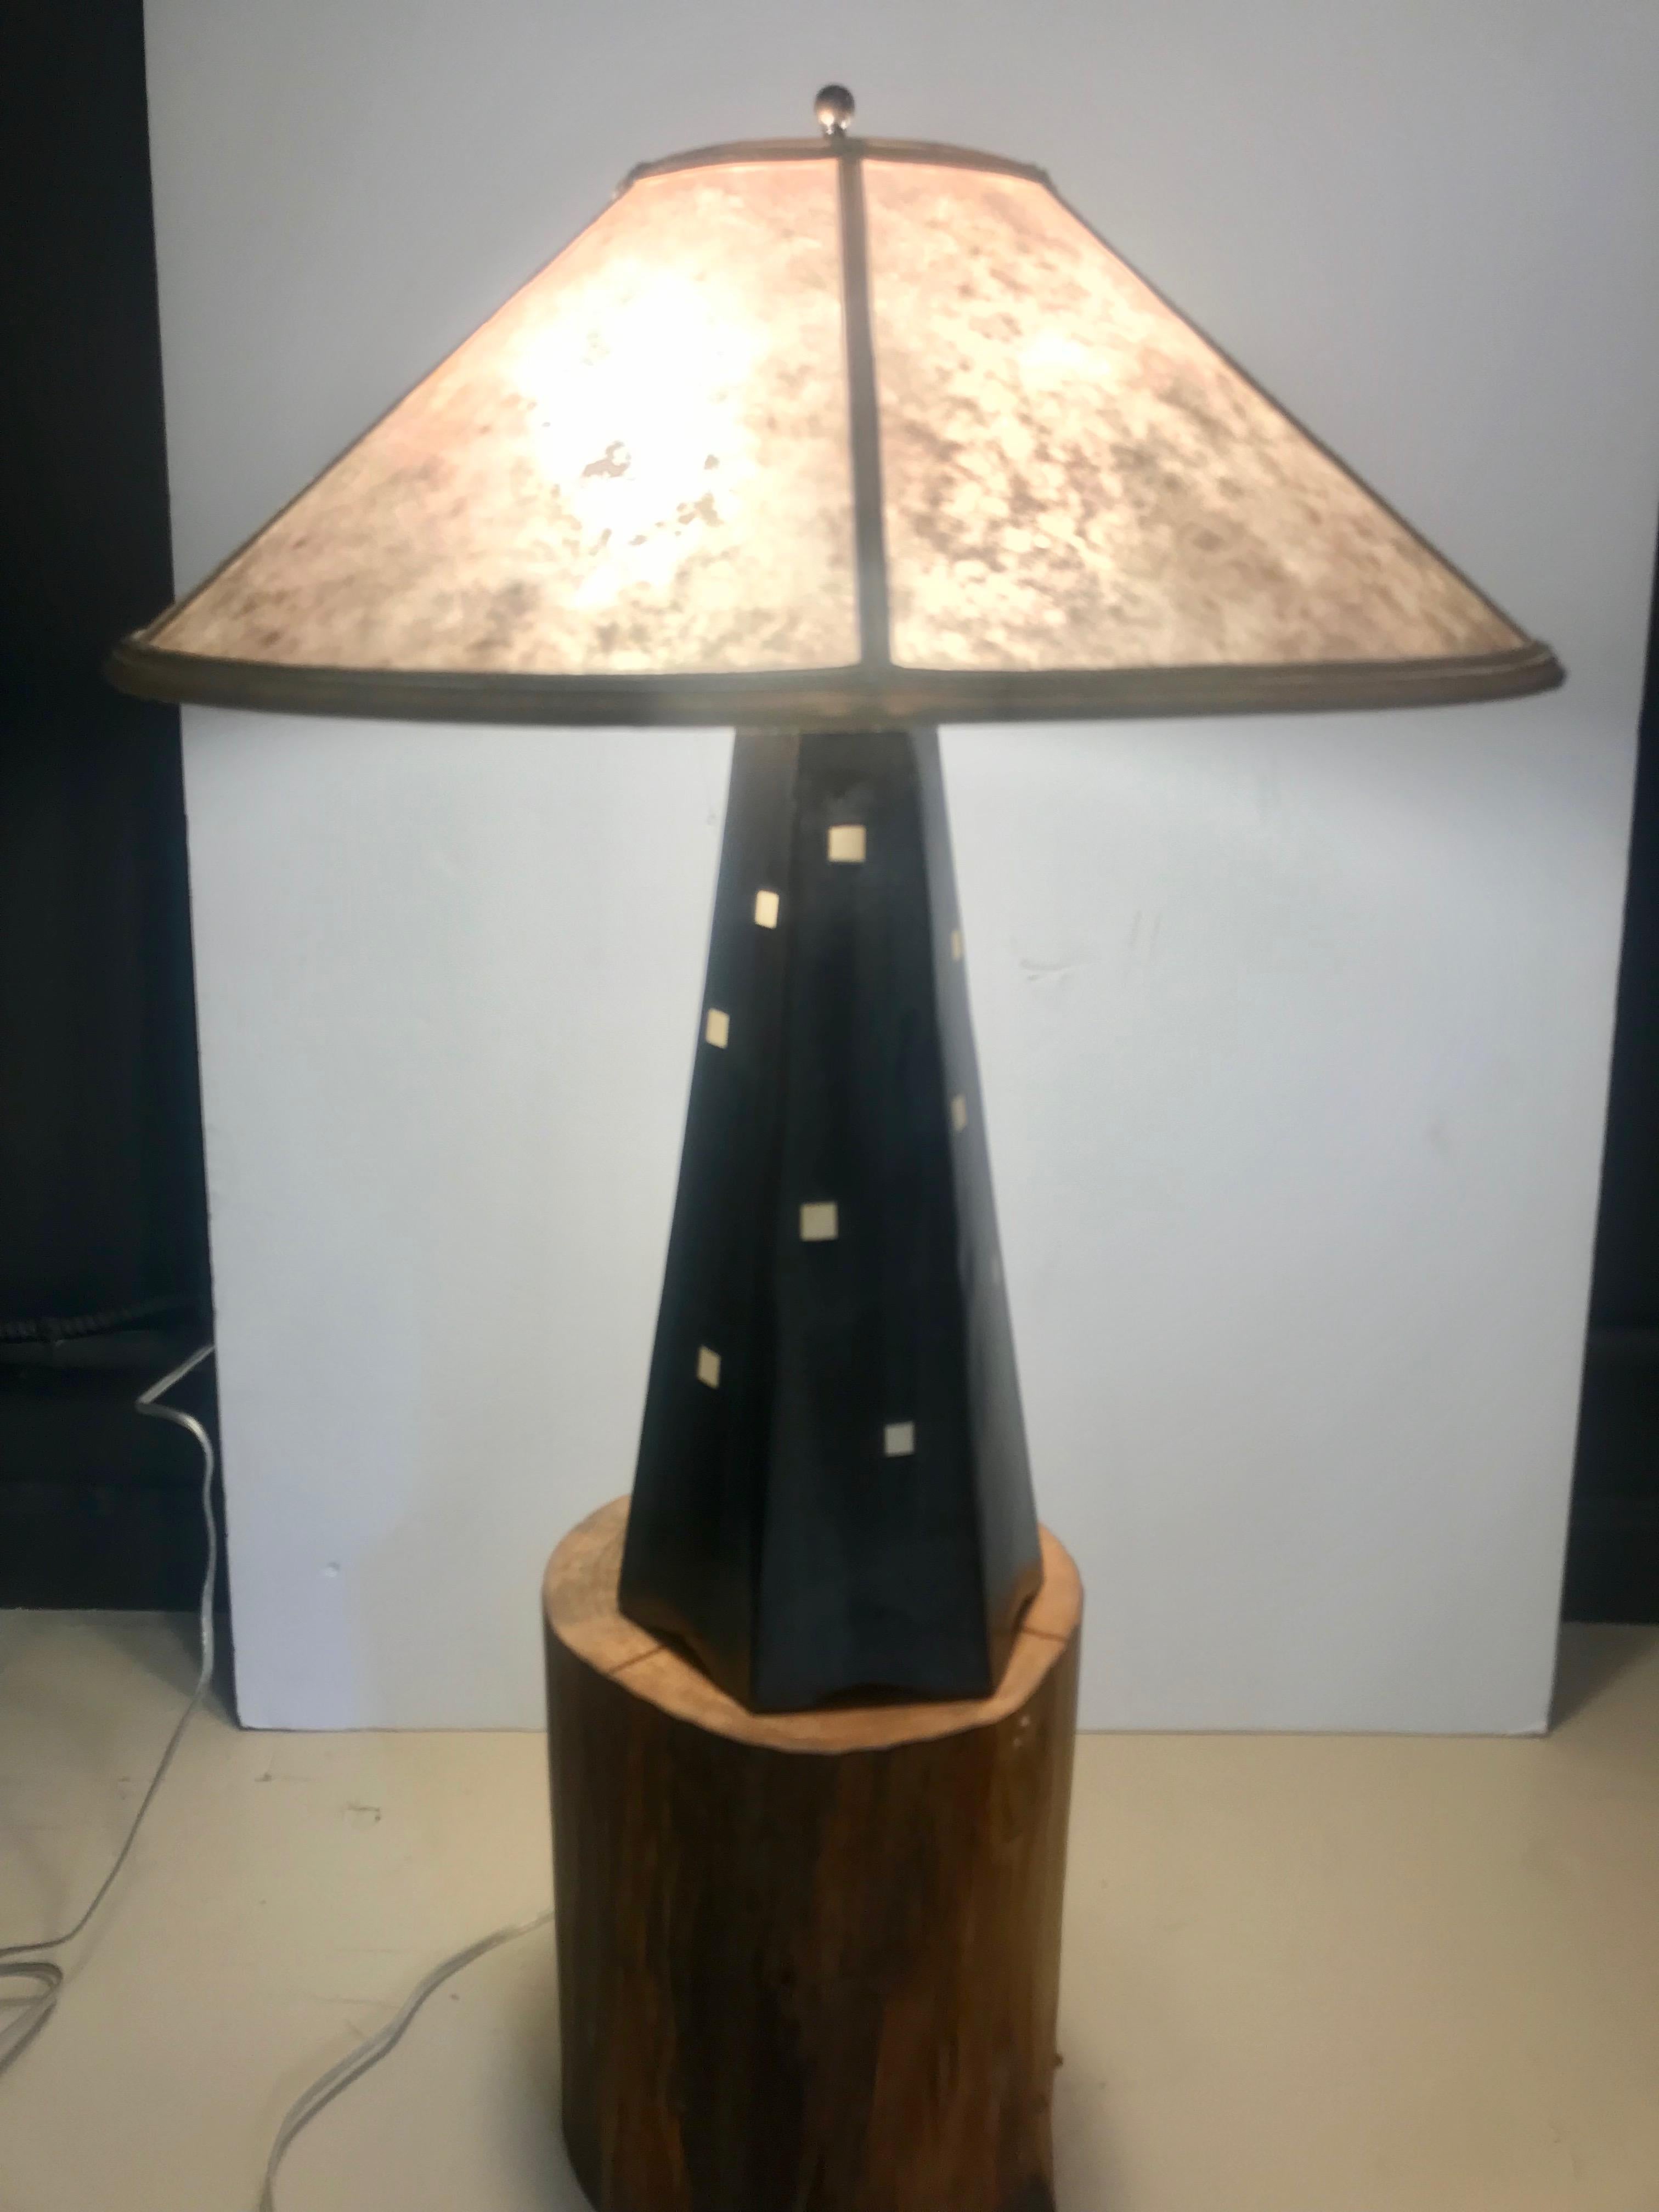 A stunning artisan crafted stoneware lamp having a black column dotted with white geometric squares by renowned artist Jim Webb. It's from his Hopewell collection in onyx glaze with a beautiful silver mica.
Dimensions:
Footprint: 7.25 x